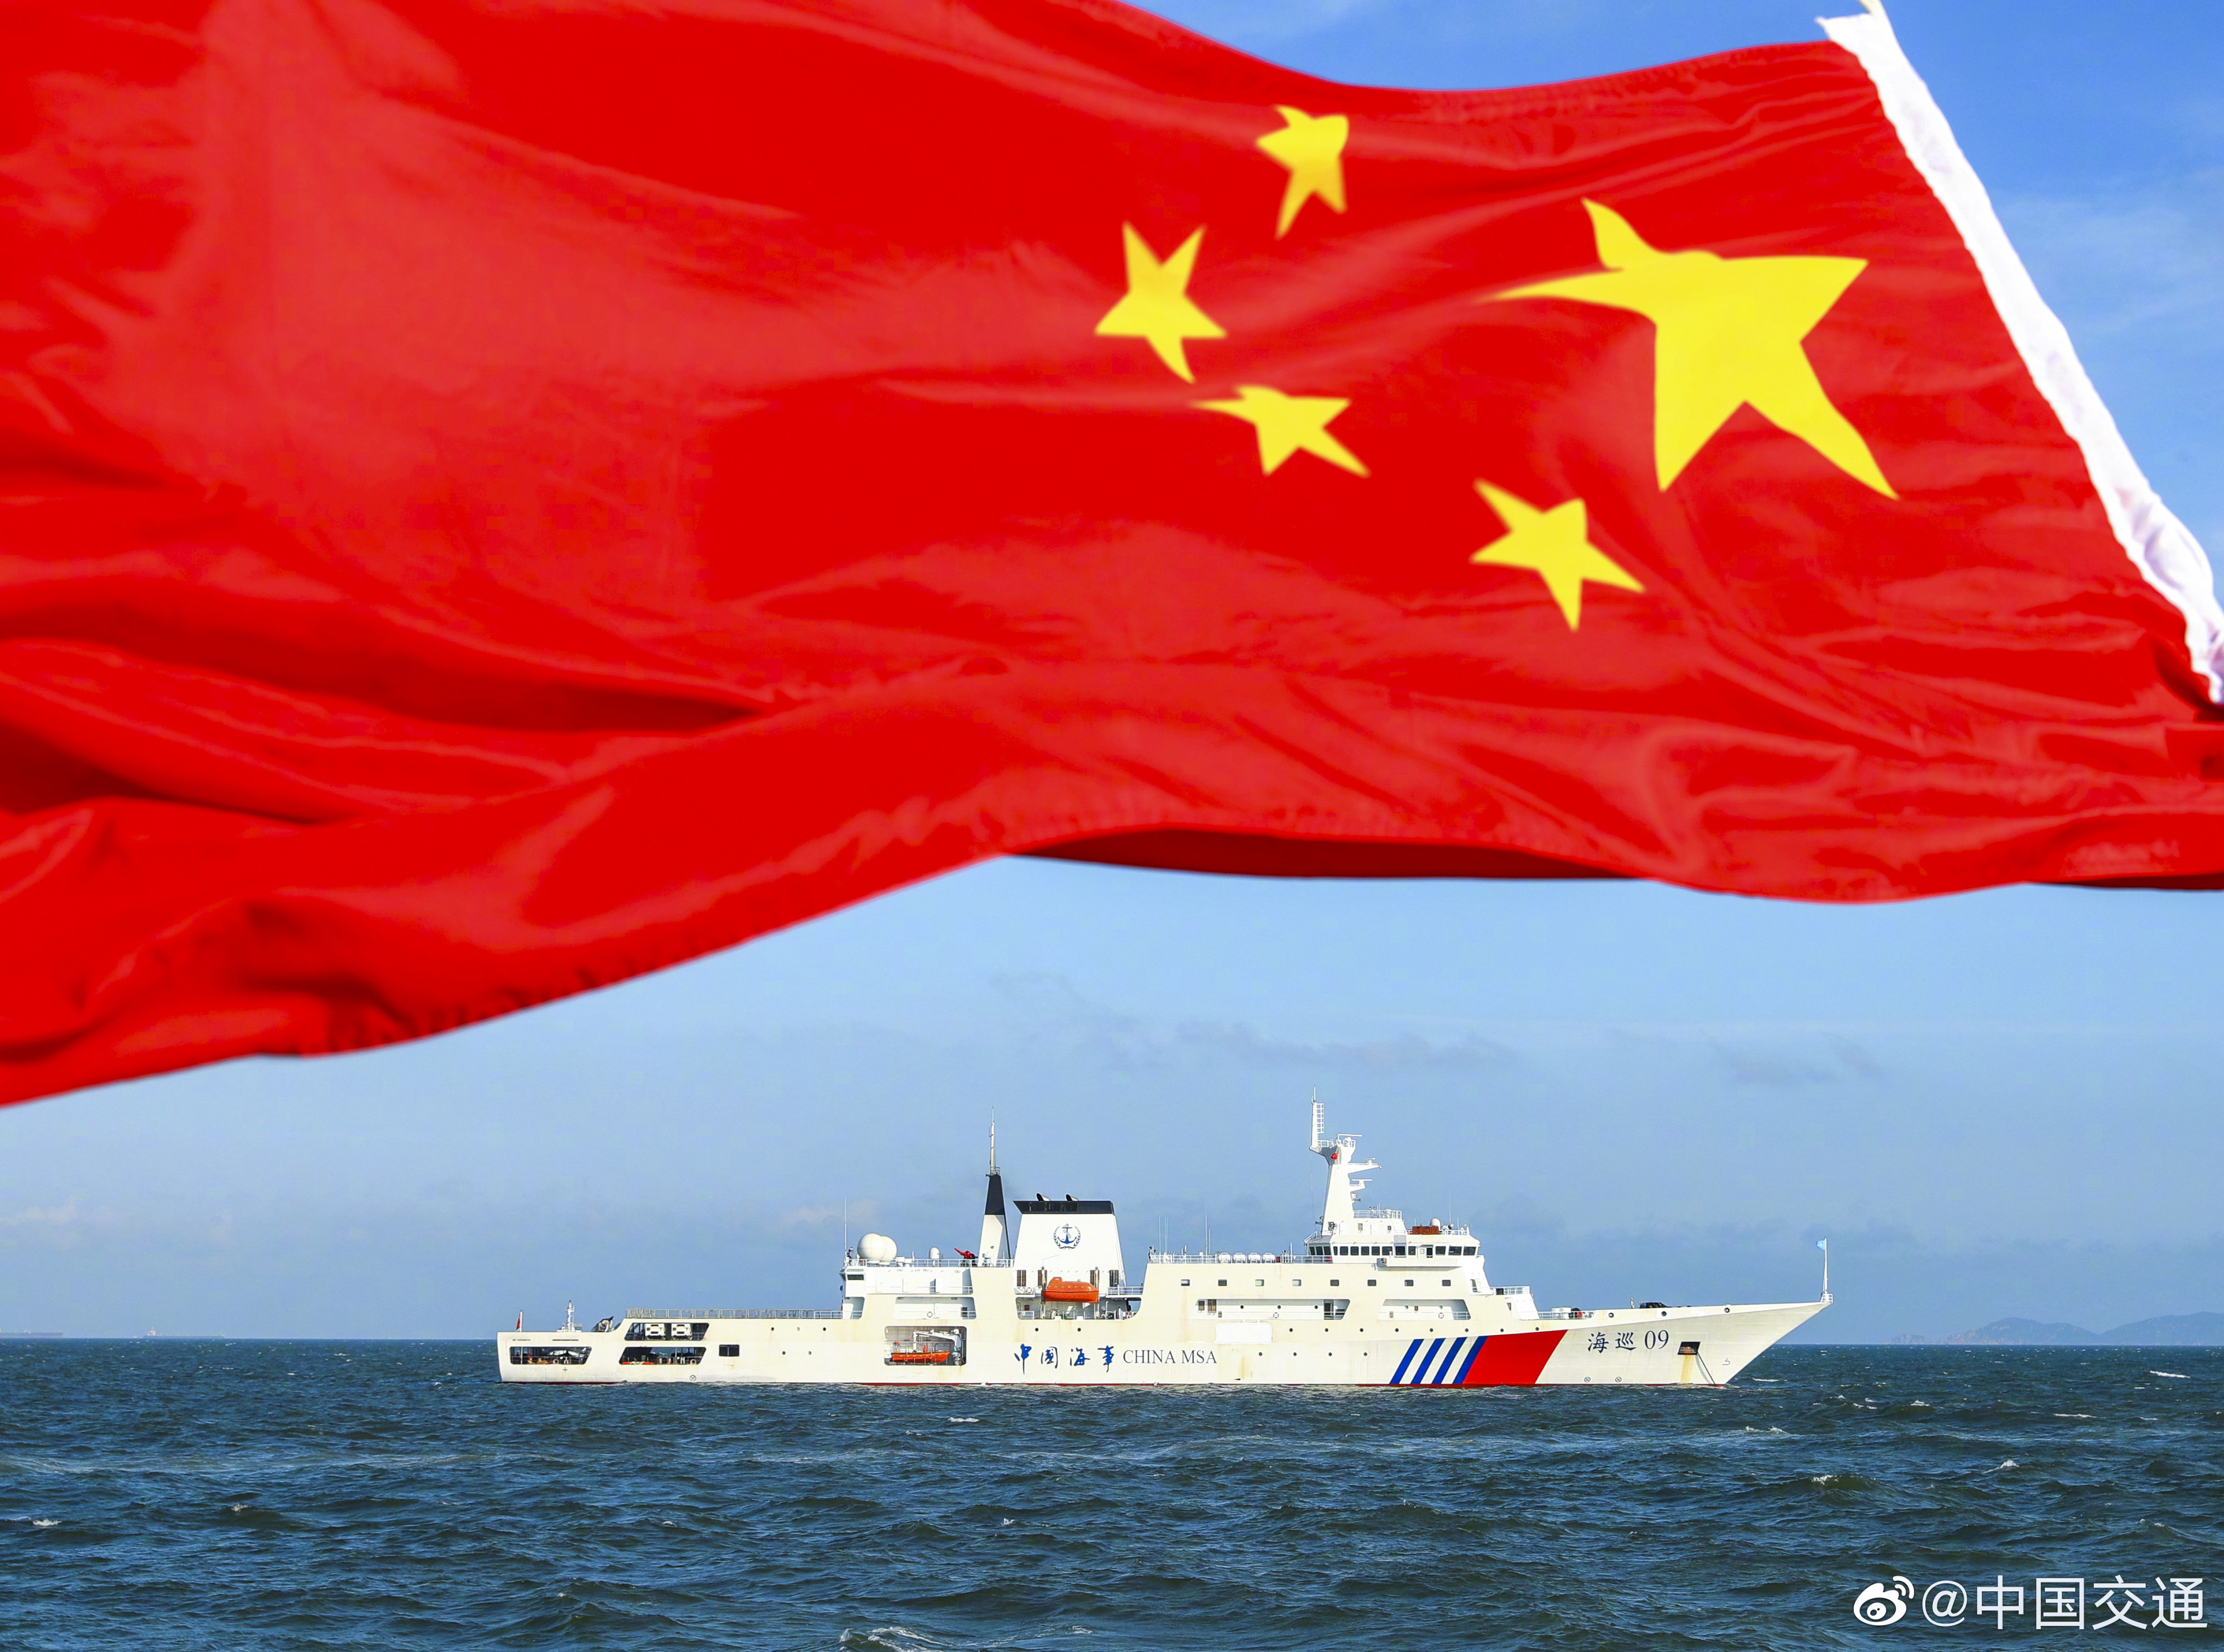 China’s largest coastguard patrol boat, equipped with water cannons, an aerial tracking system and a helicopter landing deck, shortly after its launch in 2020. Photo: Weibo